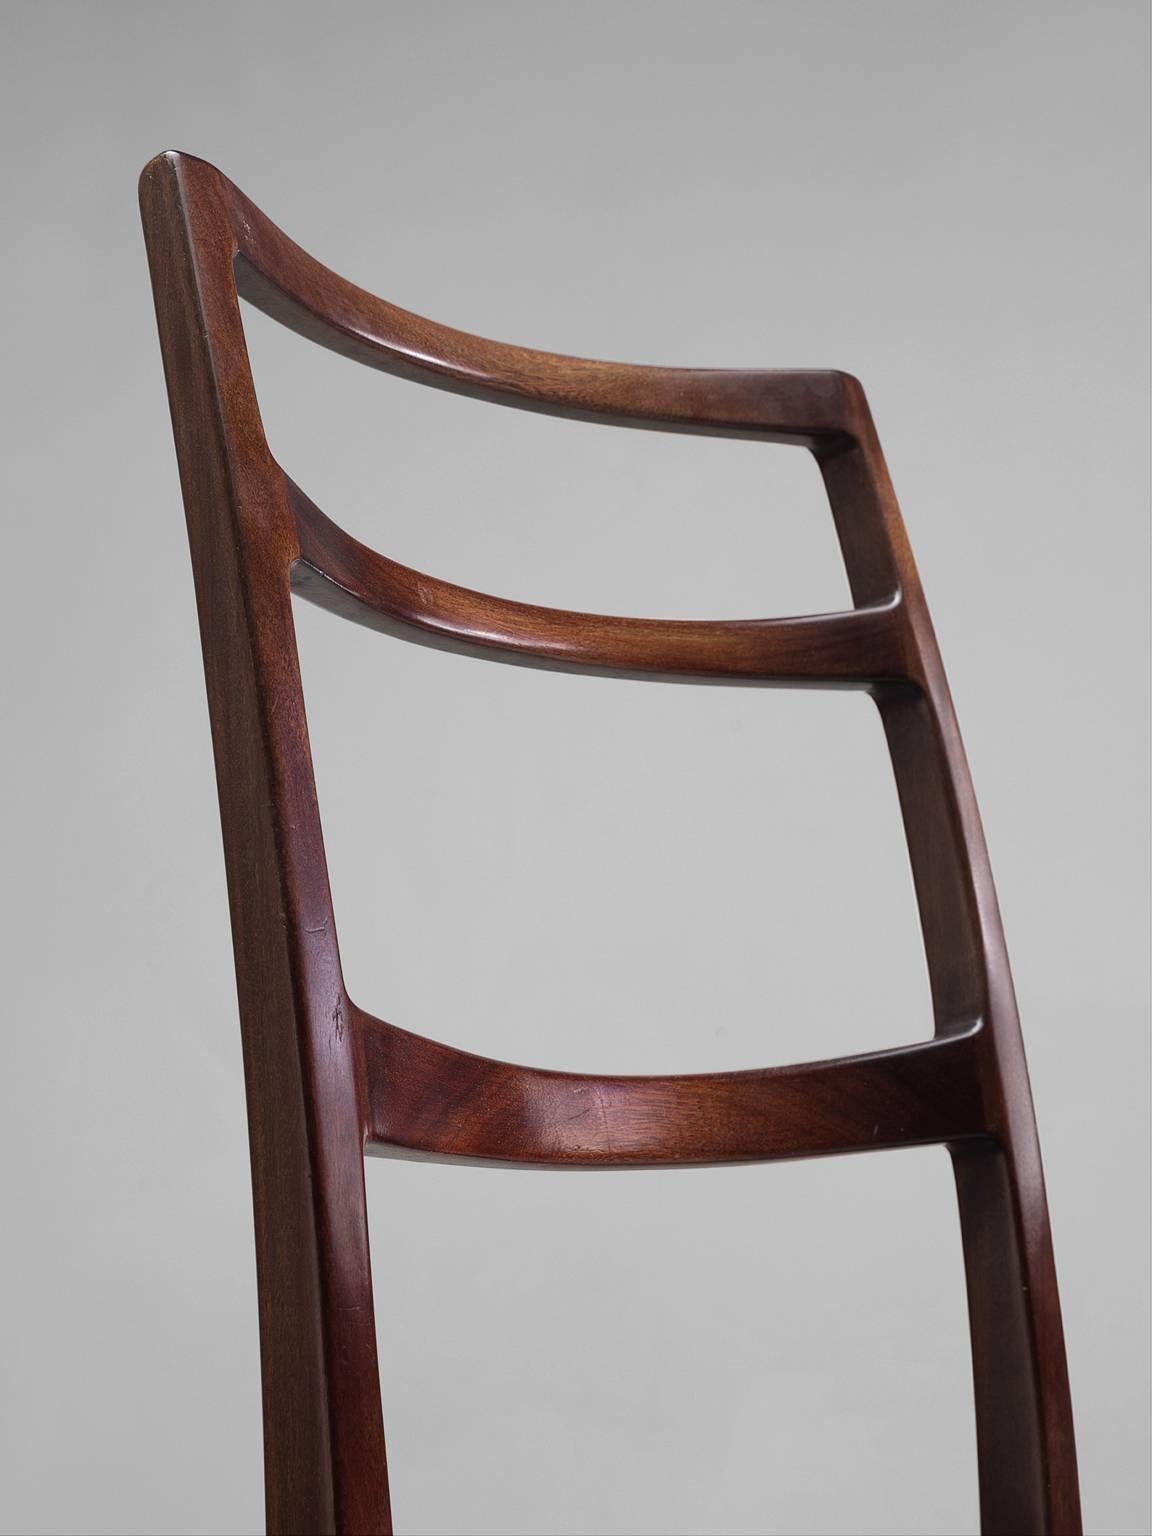 Mid-20th Century Gunni Omann Danish Dining Chairs in Black Leather and Mahogany